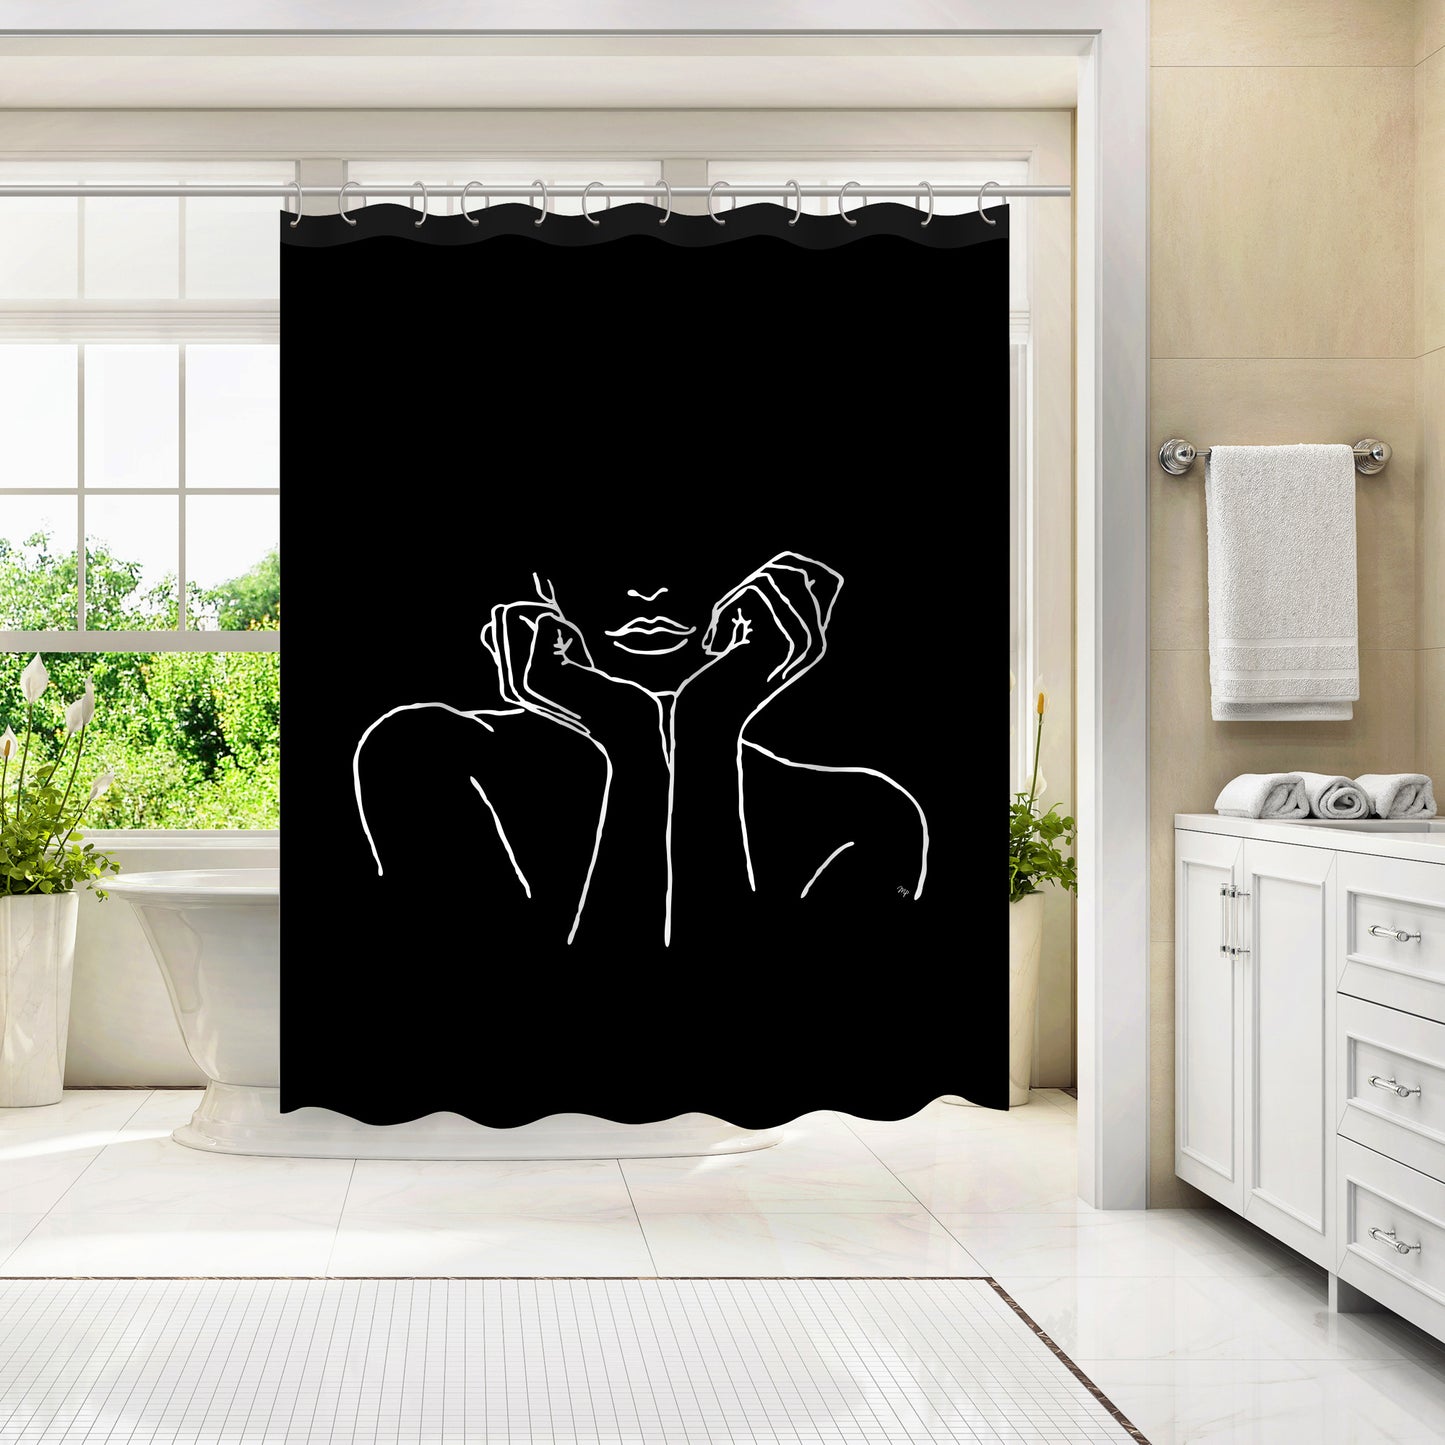 71" x 74" Decorative Shower Curtain with 12 Hooks, ThinkingBlack by Martina